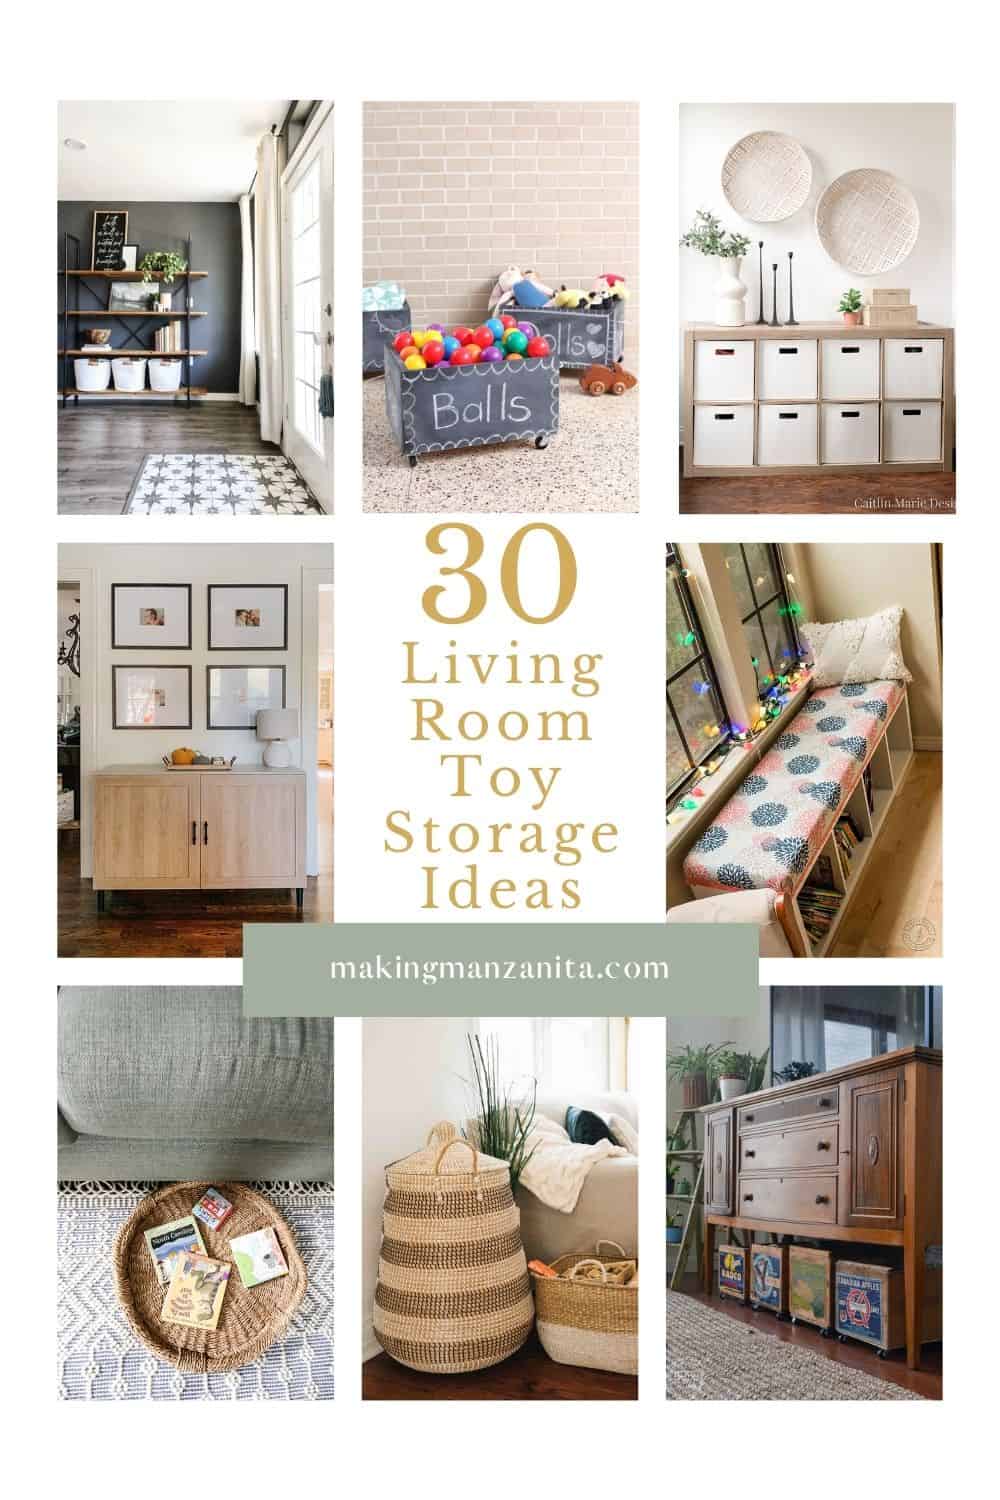 Toy Storage for Living Room: 30 Clever Ideas - Making Manzanita